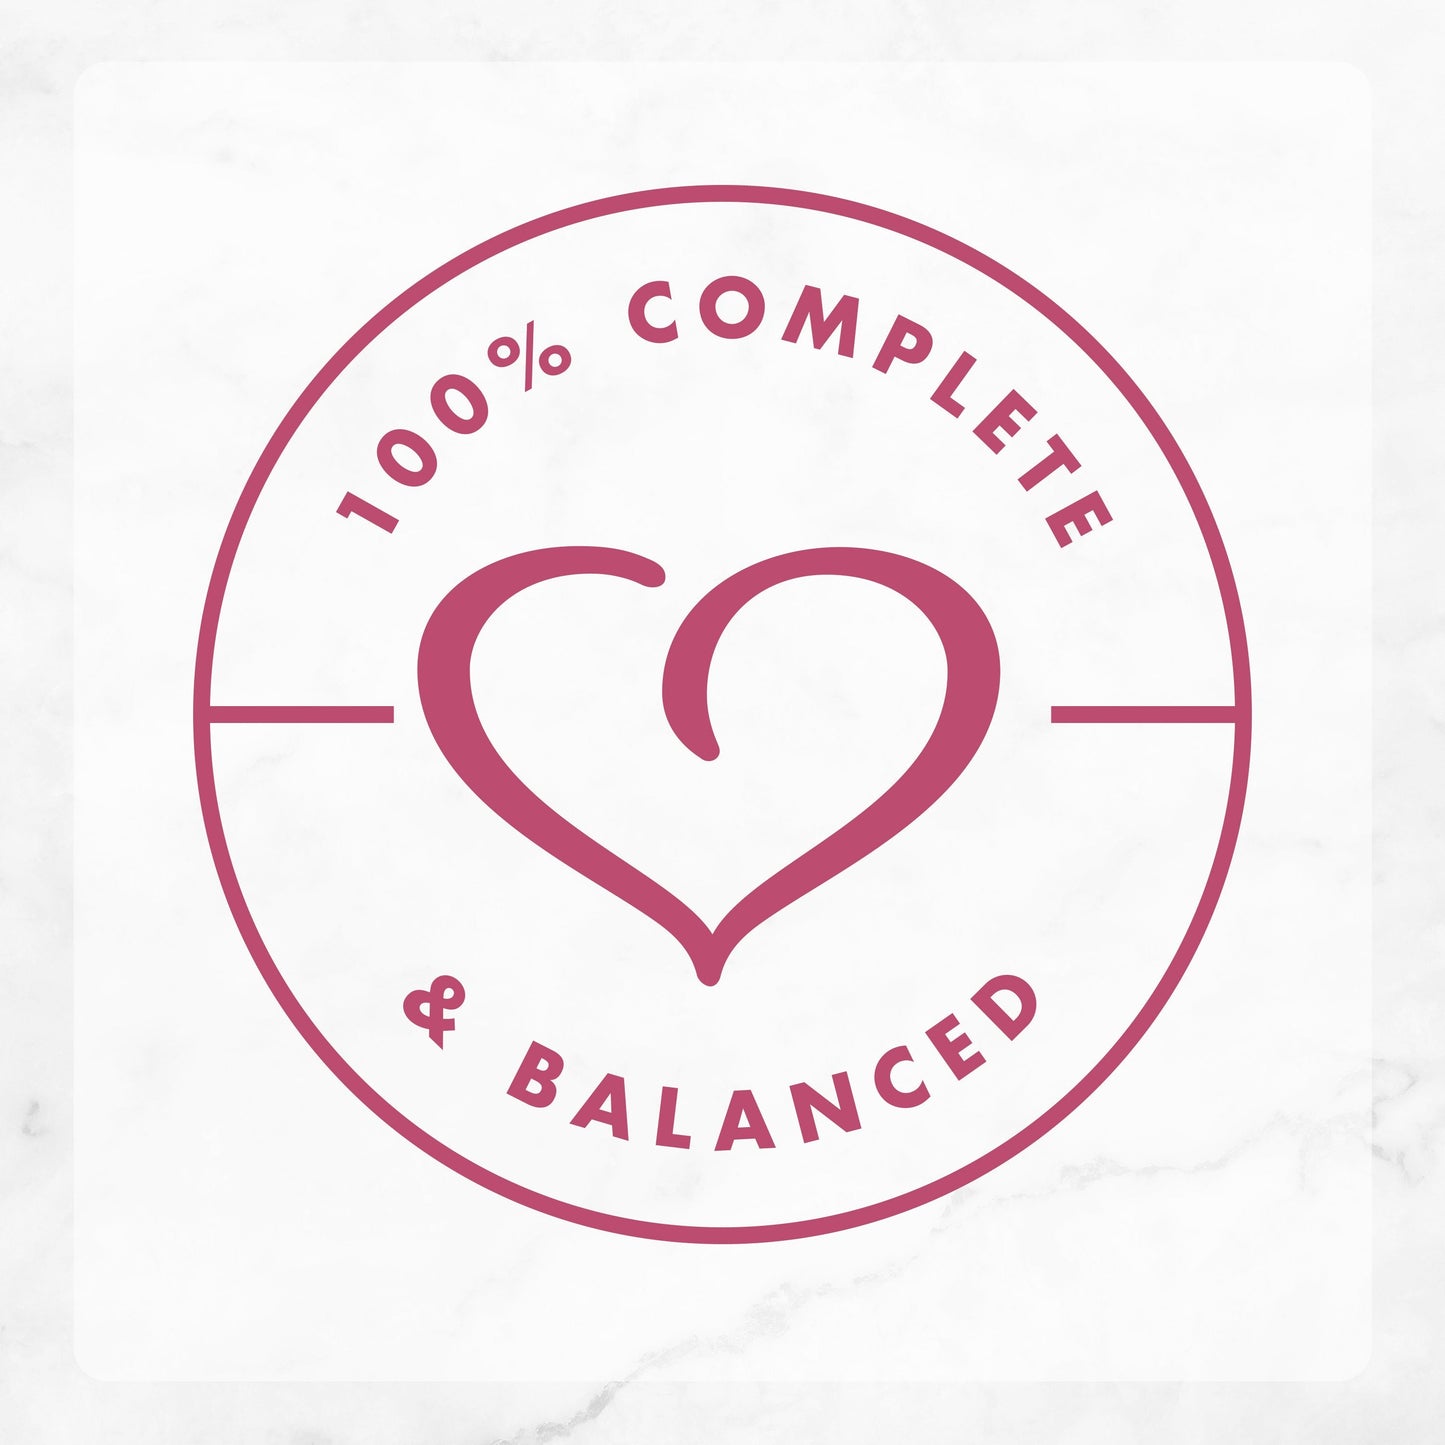 100% Complete and Balanced